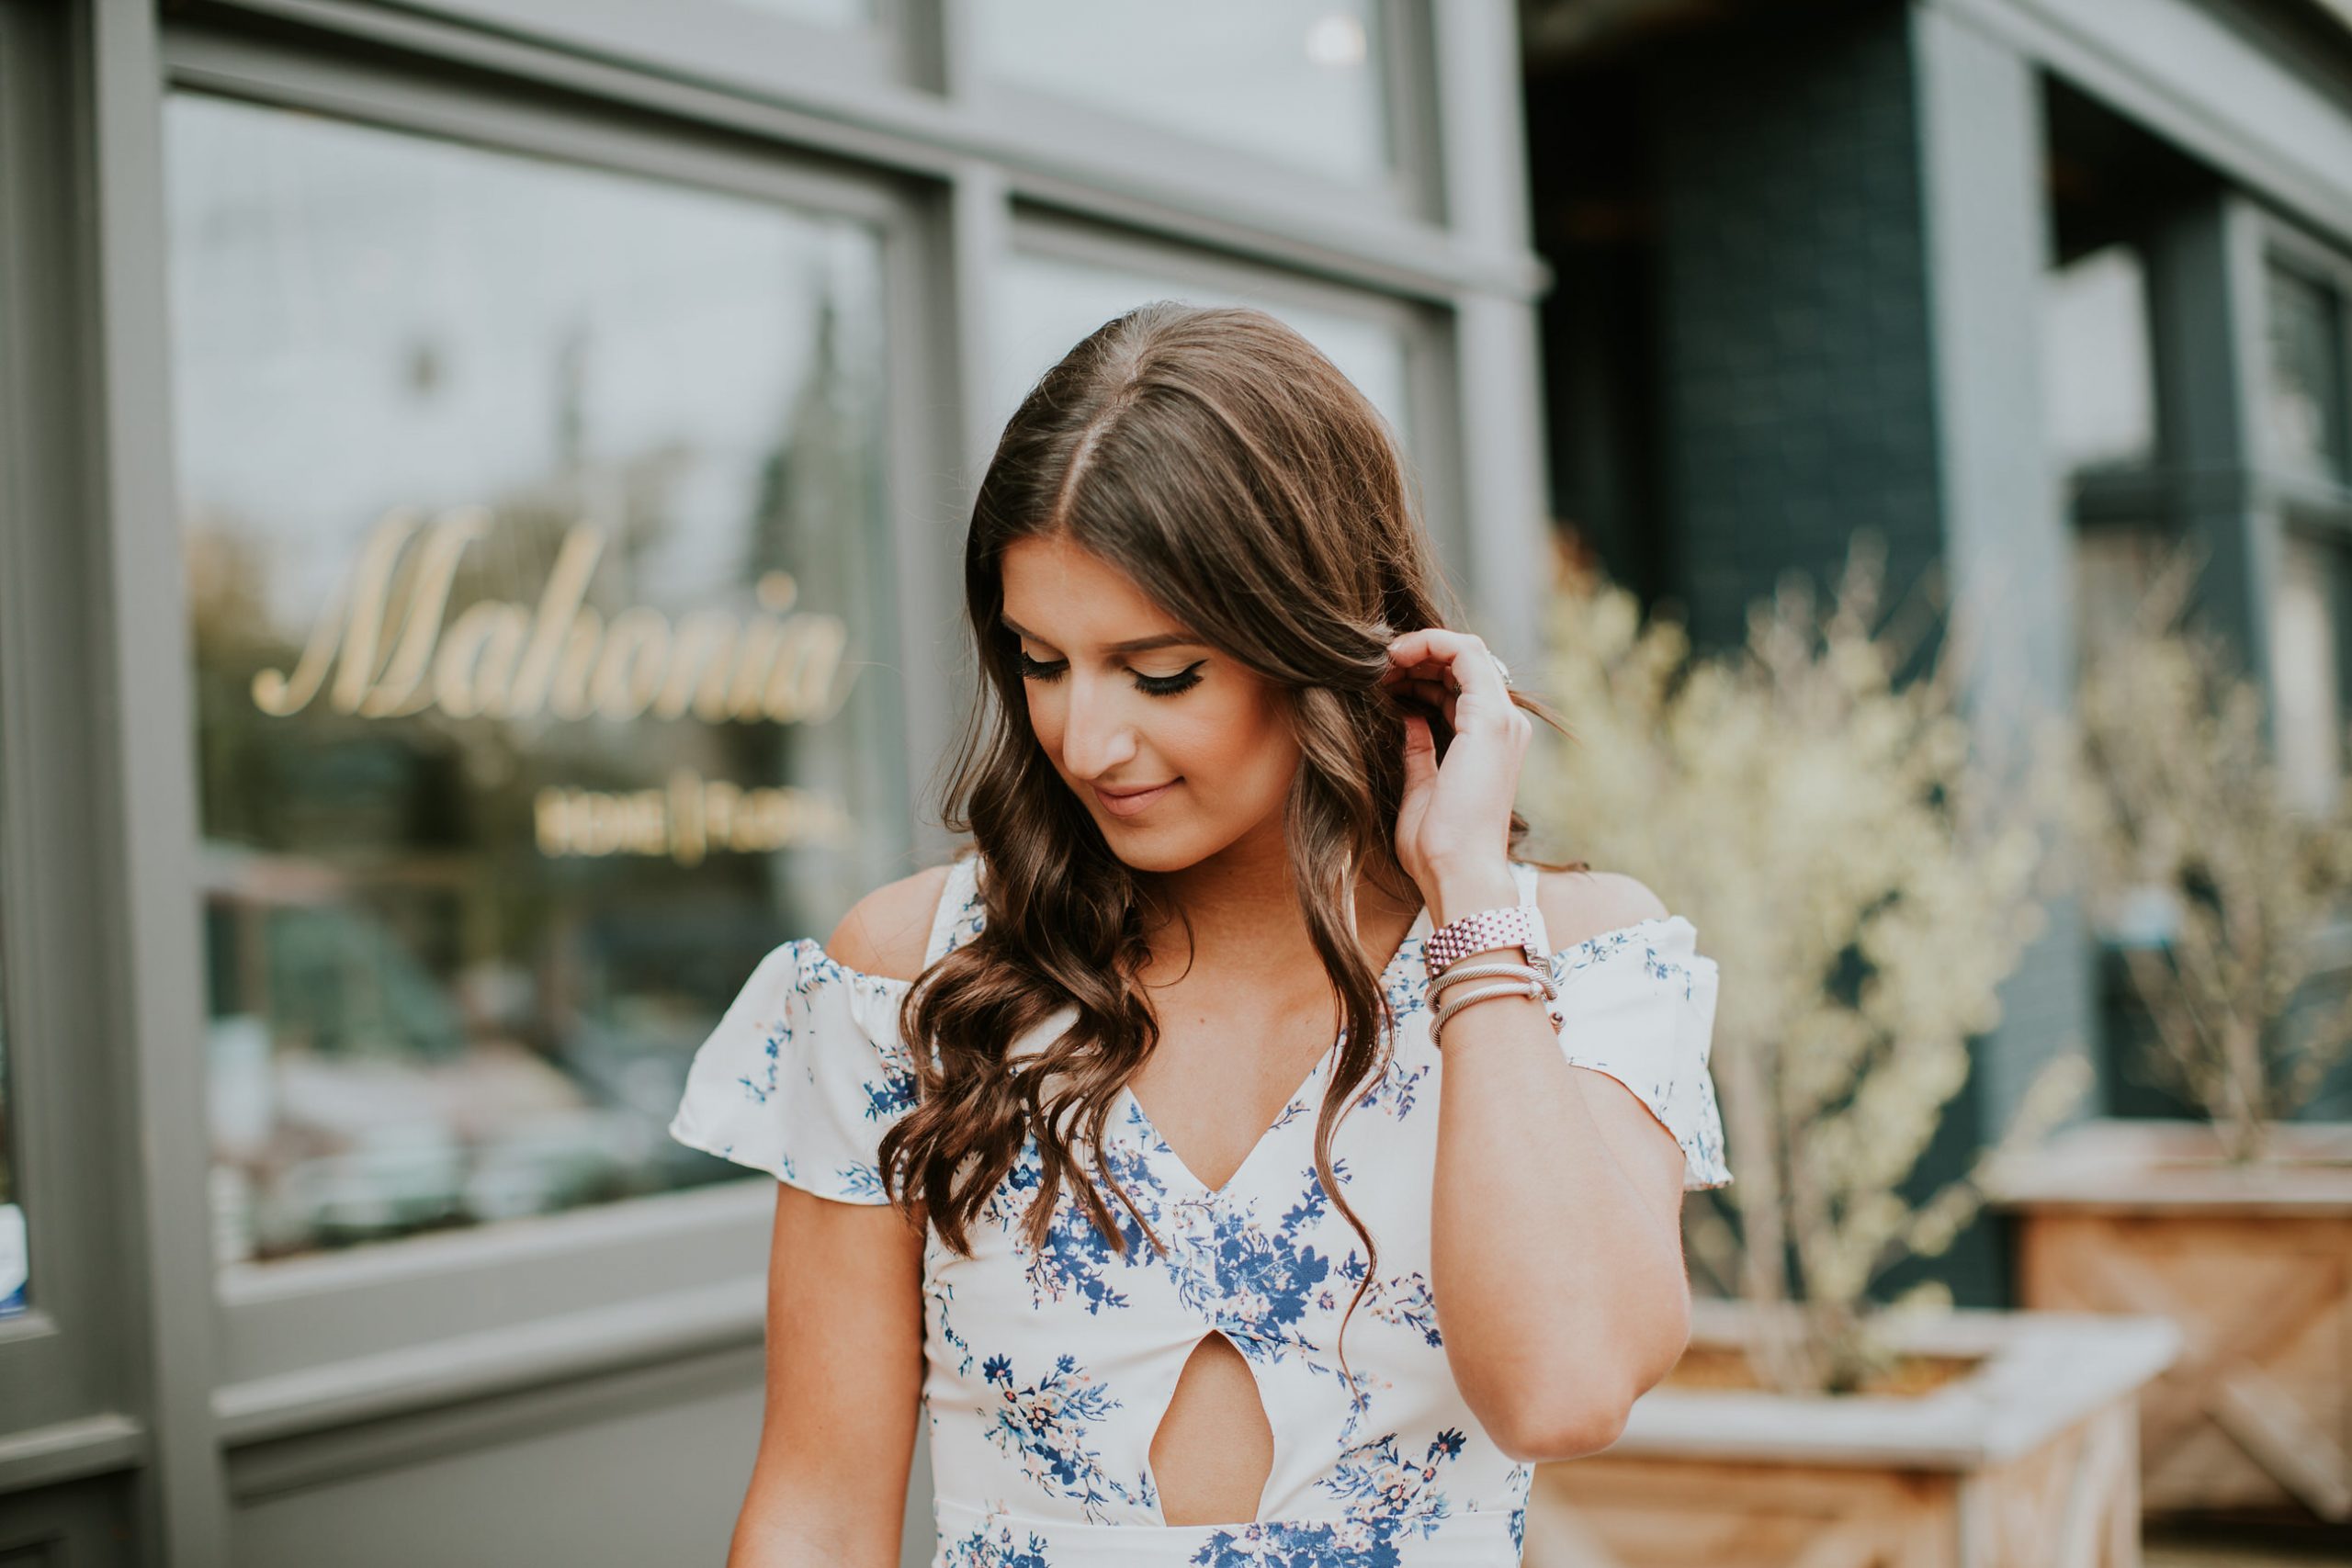 floral cold shoulder dress, spring fashion, spring dress, spring style, spring fashion, kentucky derby dress, cocktail dress, wedding guest dress, gold chain earrings, steve madden carrson sandal // grace wainwright a southern drawl